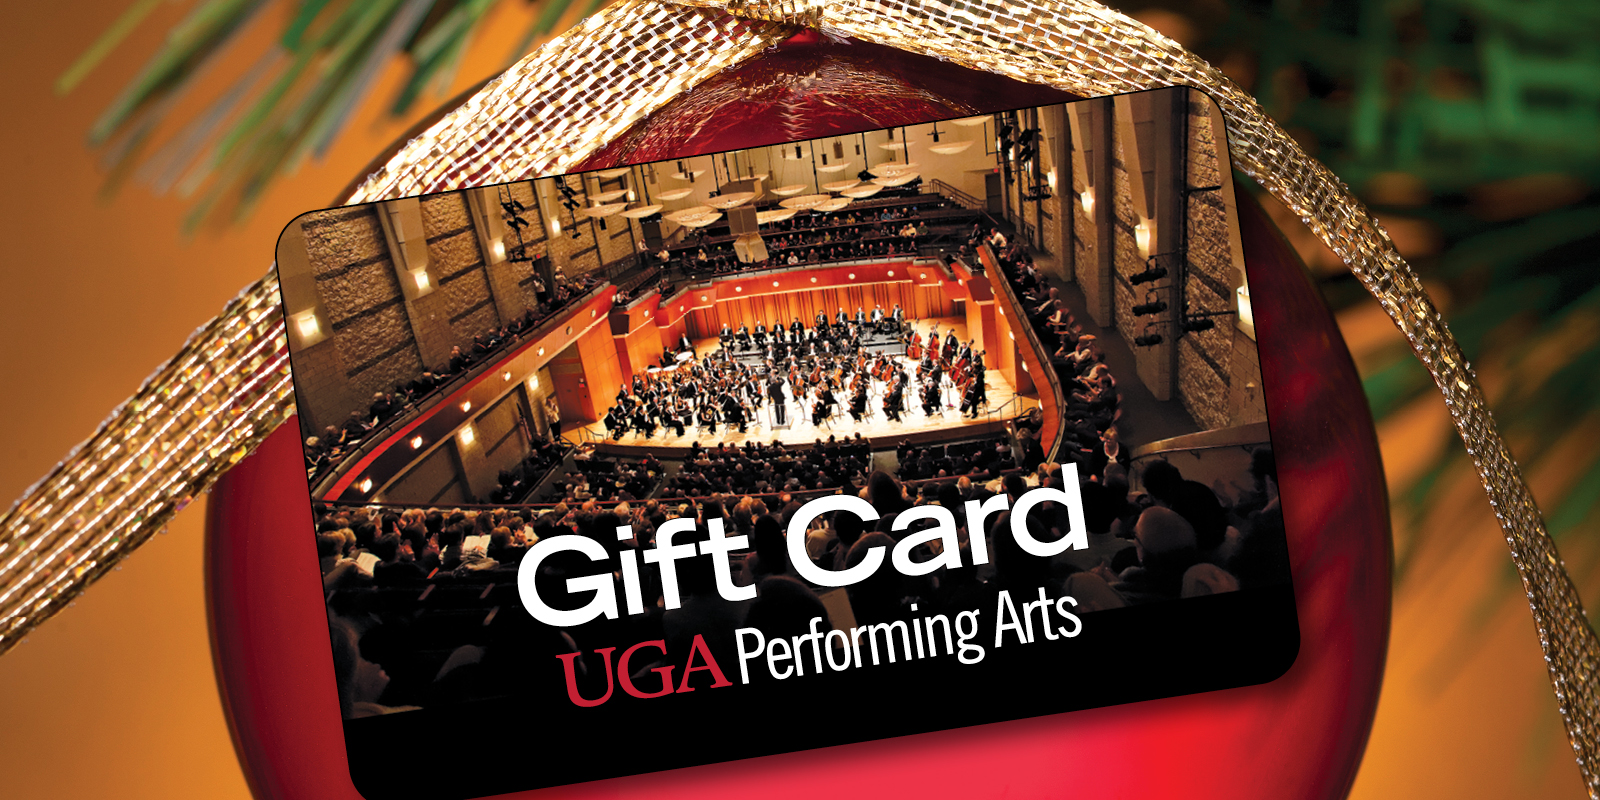 Gift Cards — The Best Way To Share The Excitement of Live Performance